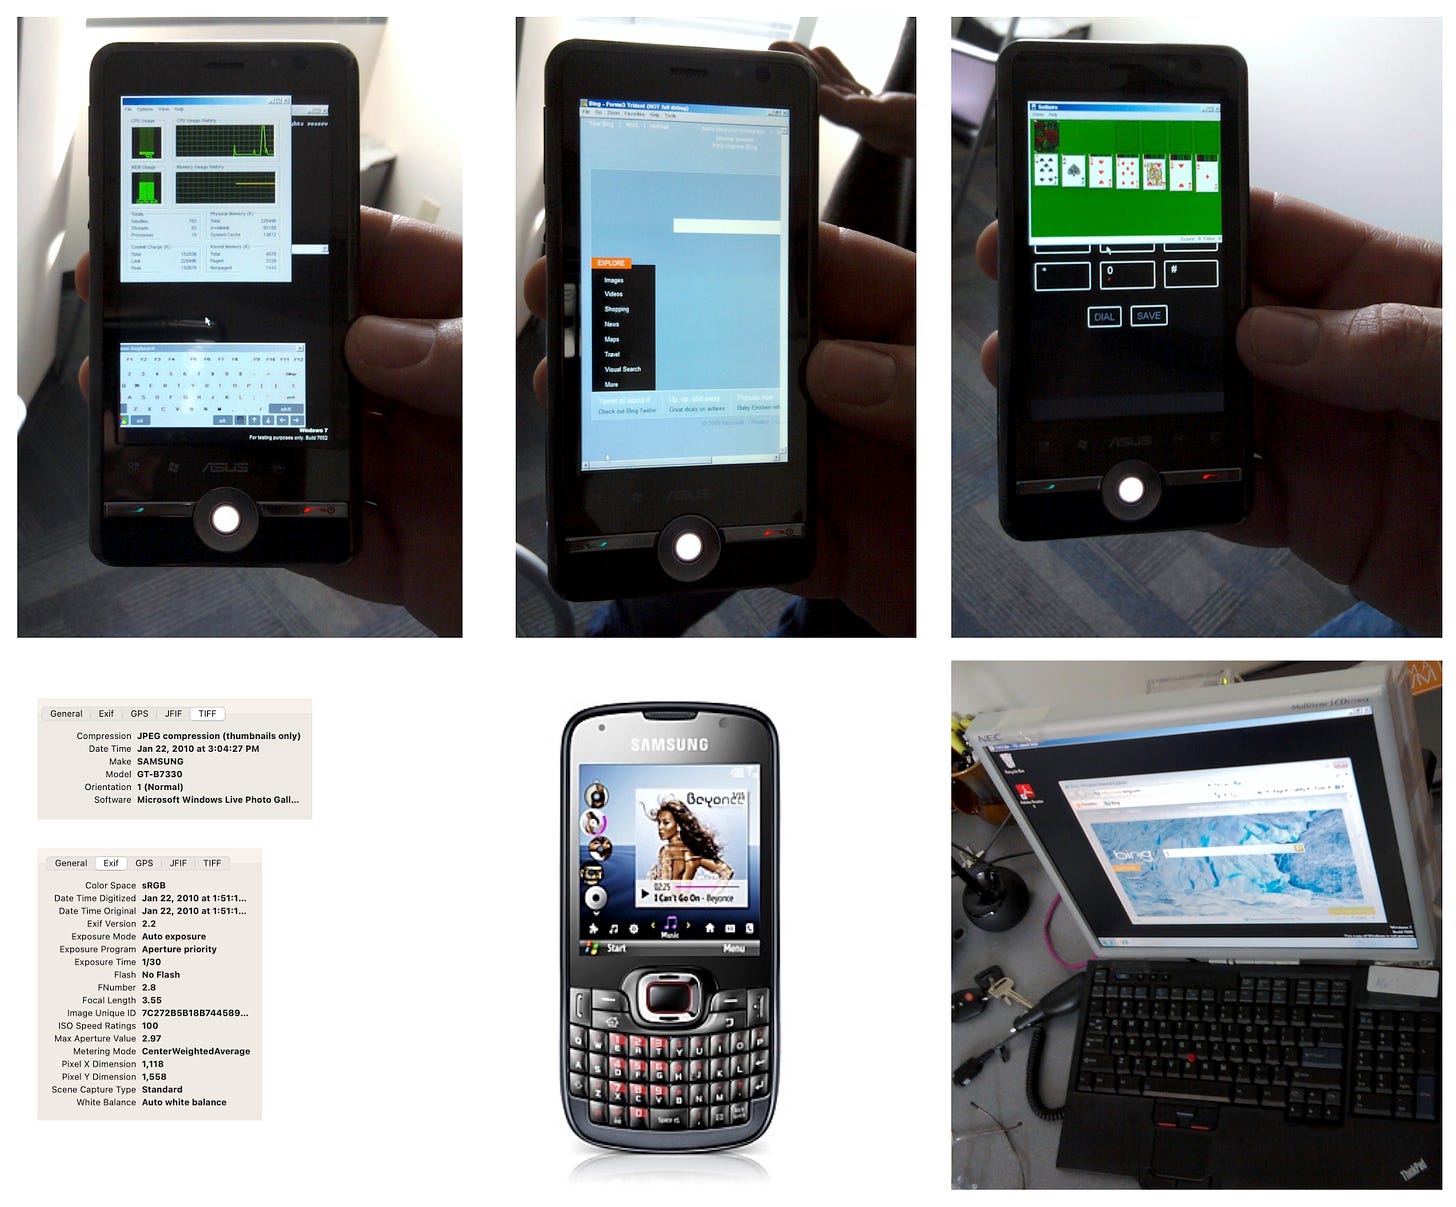 This is a collage of 6 images. The first three are photos of a hand holding an ASUS phone running Windows 7 ported to ARM. Then there is an image the full Windows 7 desktop and Internet Explorer running on basically a motherboard. Then there is an image of the Samsung phone and associated metadata from those photos.